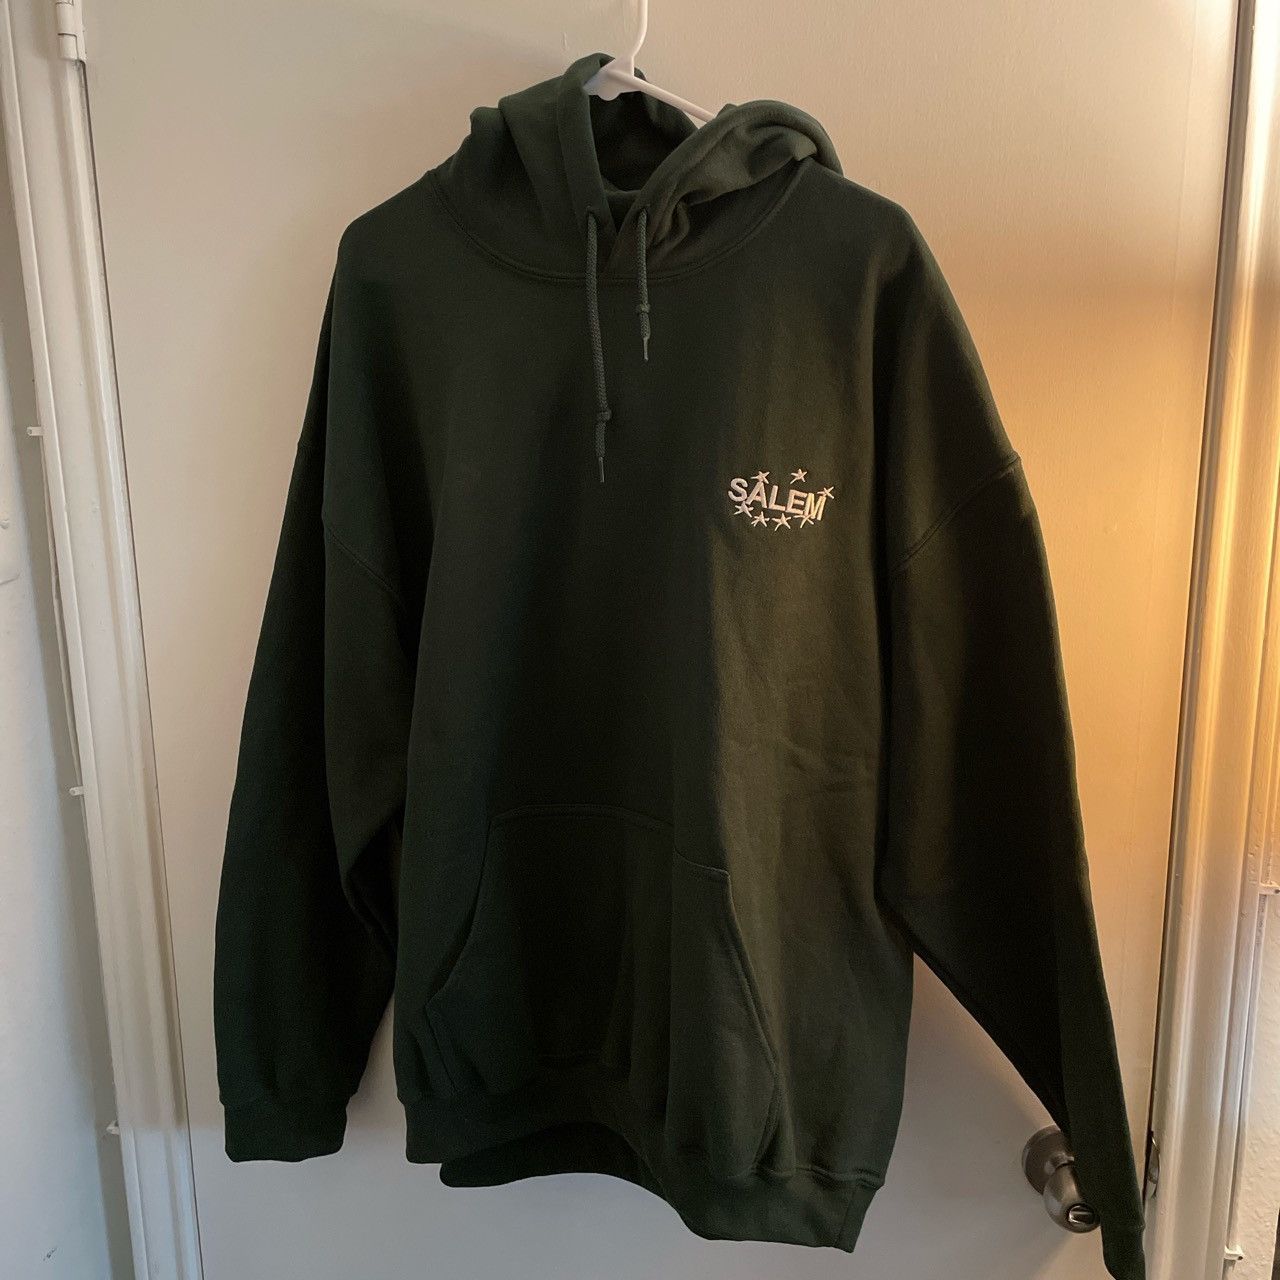 Other S4lem midwest green hoodie | Grailed